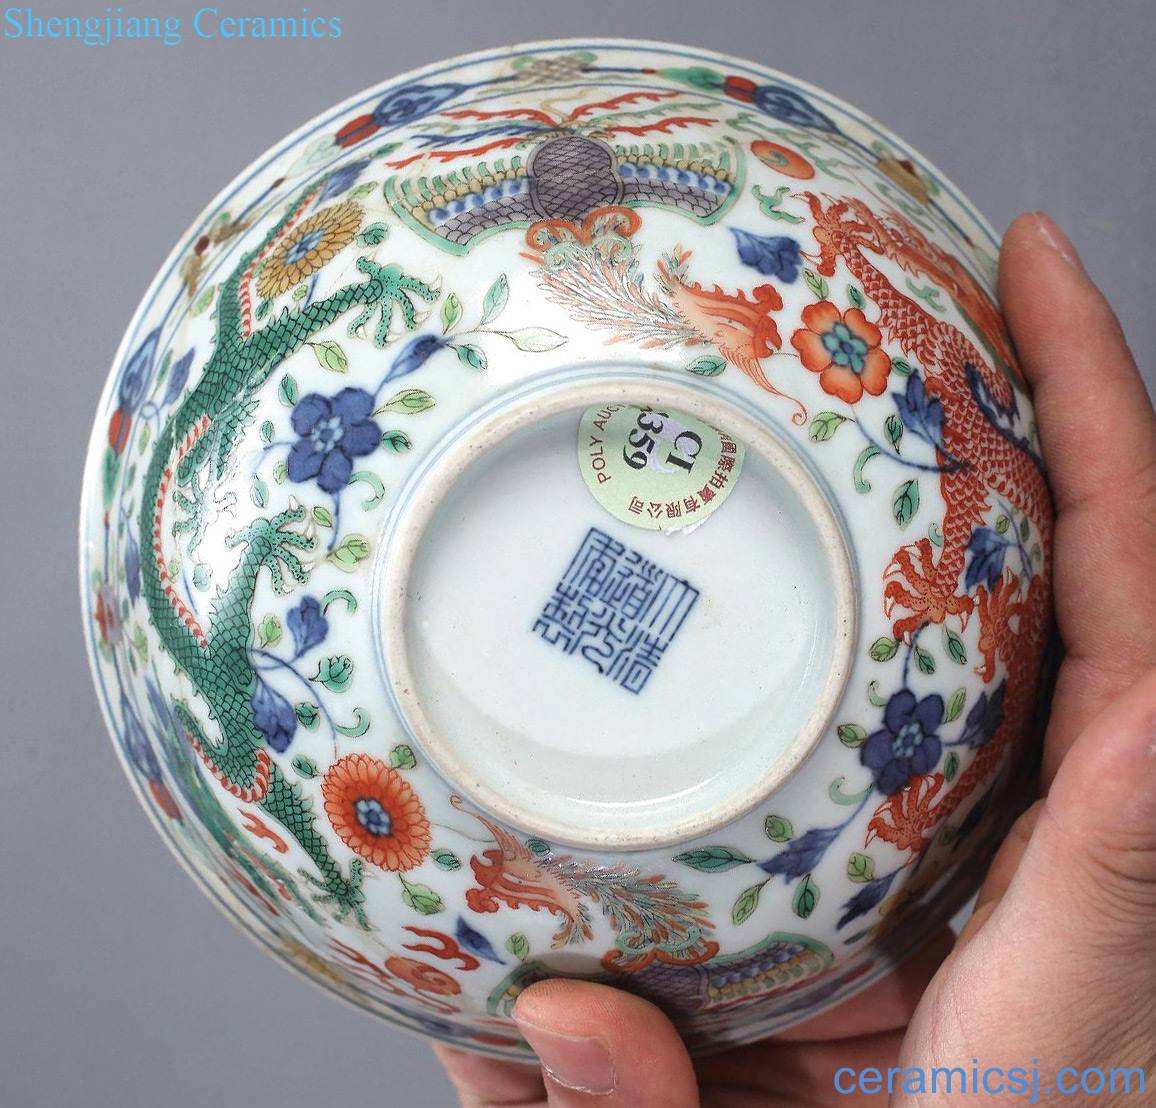 Qing daoguang Blue and white longfeng bowl